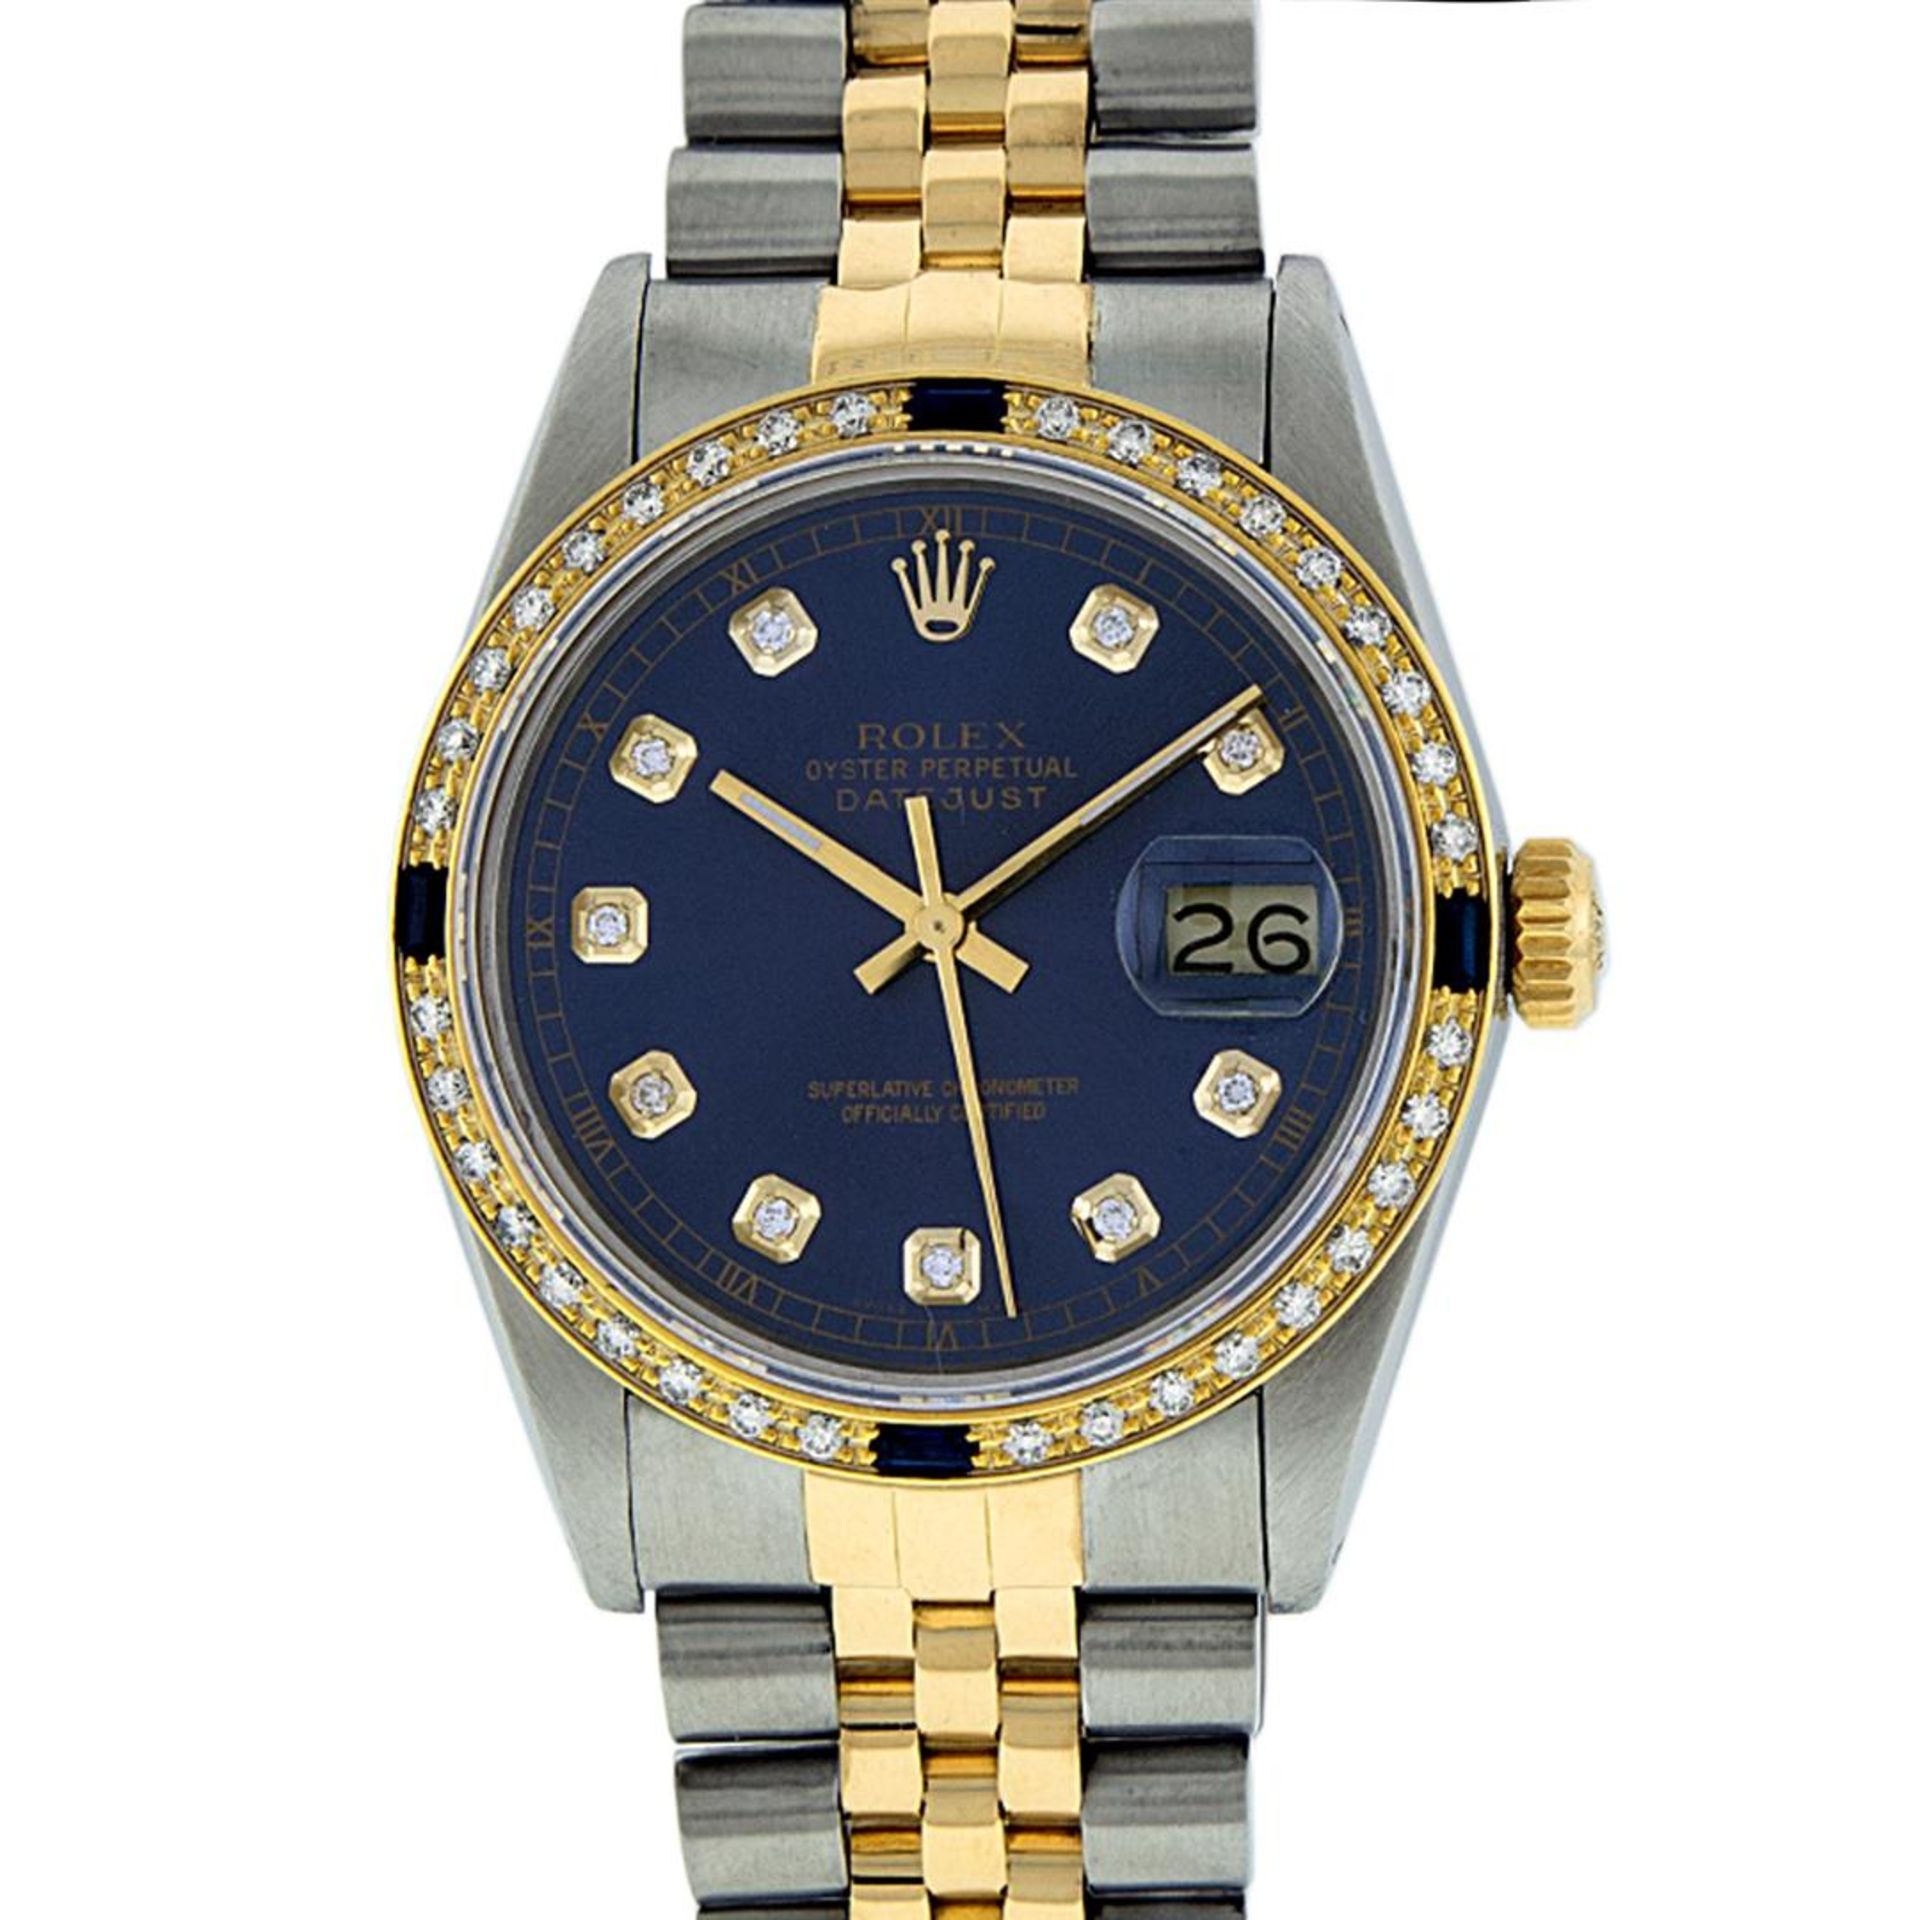 Rolex Mens 2 Tone Blue Diamond & Sapphire Oyster Perpetual Datejust Wriswatch 36 - Image 2 of 9